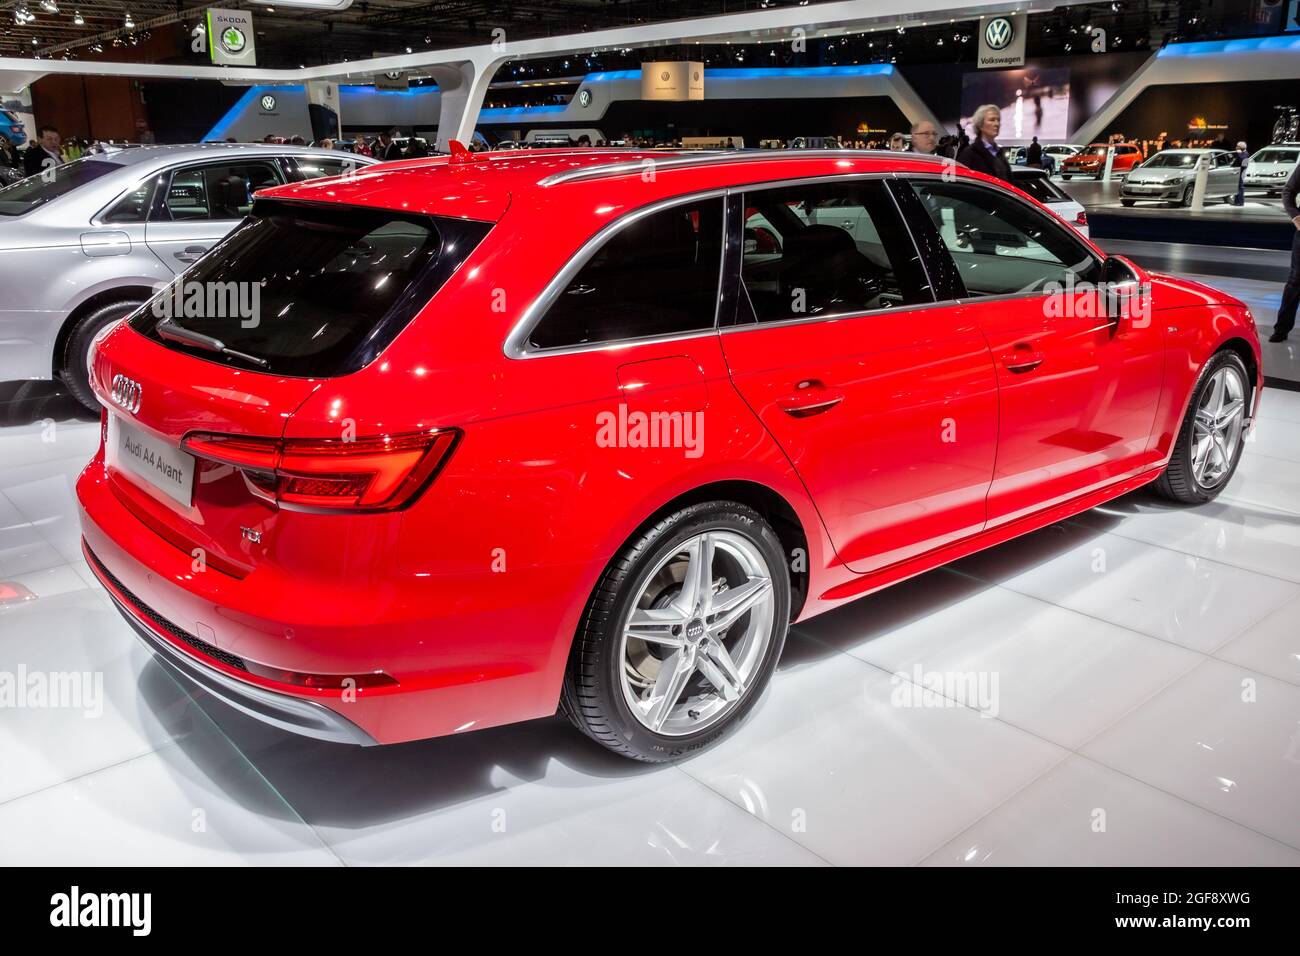 Audi A4 Avant car presented at the Brussels Expo Autosalon motor show. Belgium - January 12, 2016 Stock Photo